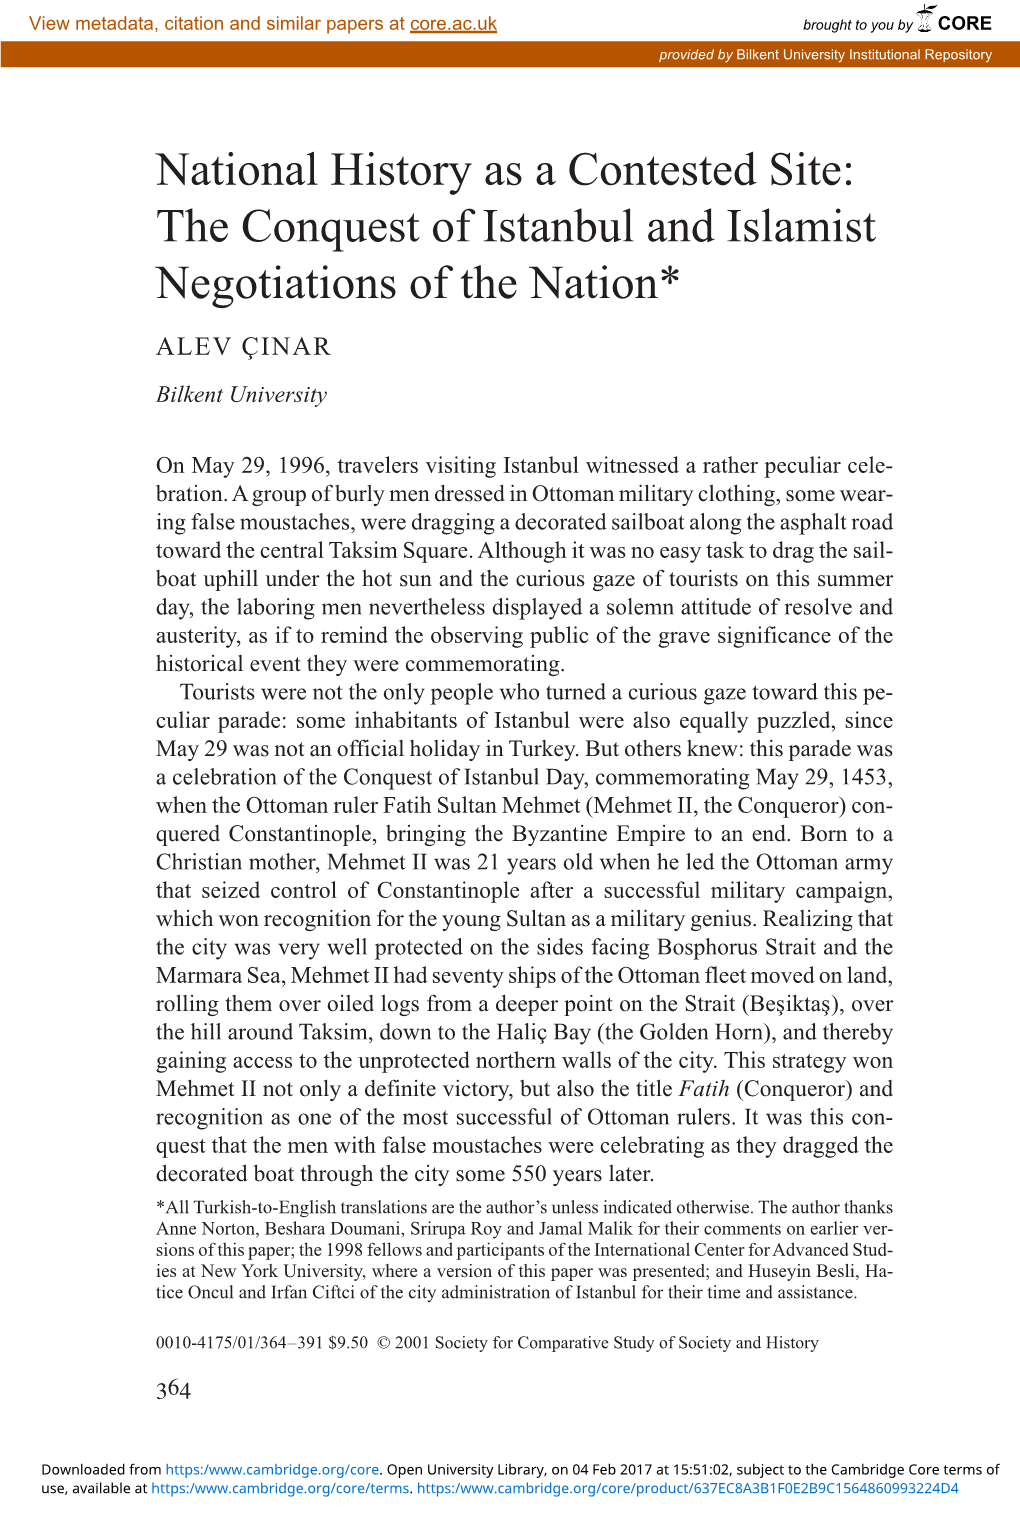 National History As a Contested Site: the Conquest of Istanbul and Islamist Negotiations of the Nation*